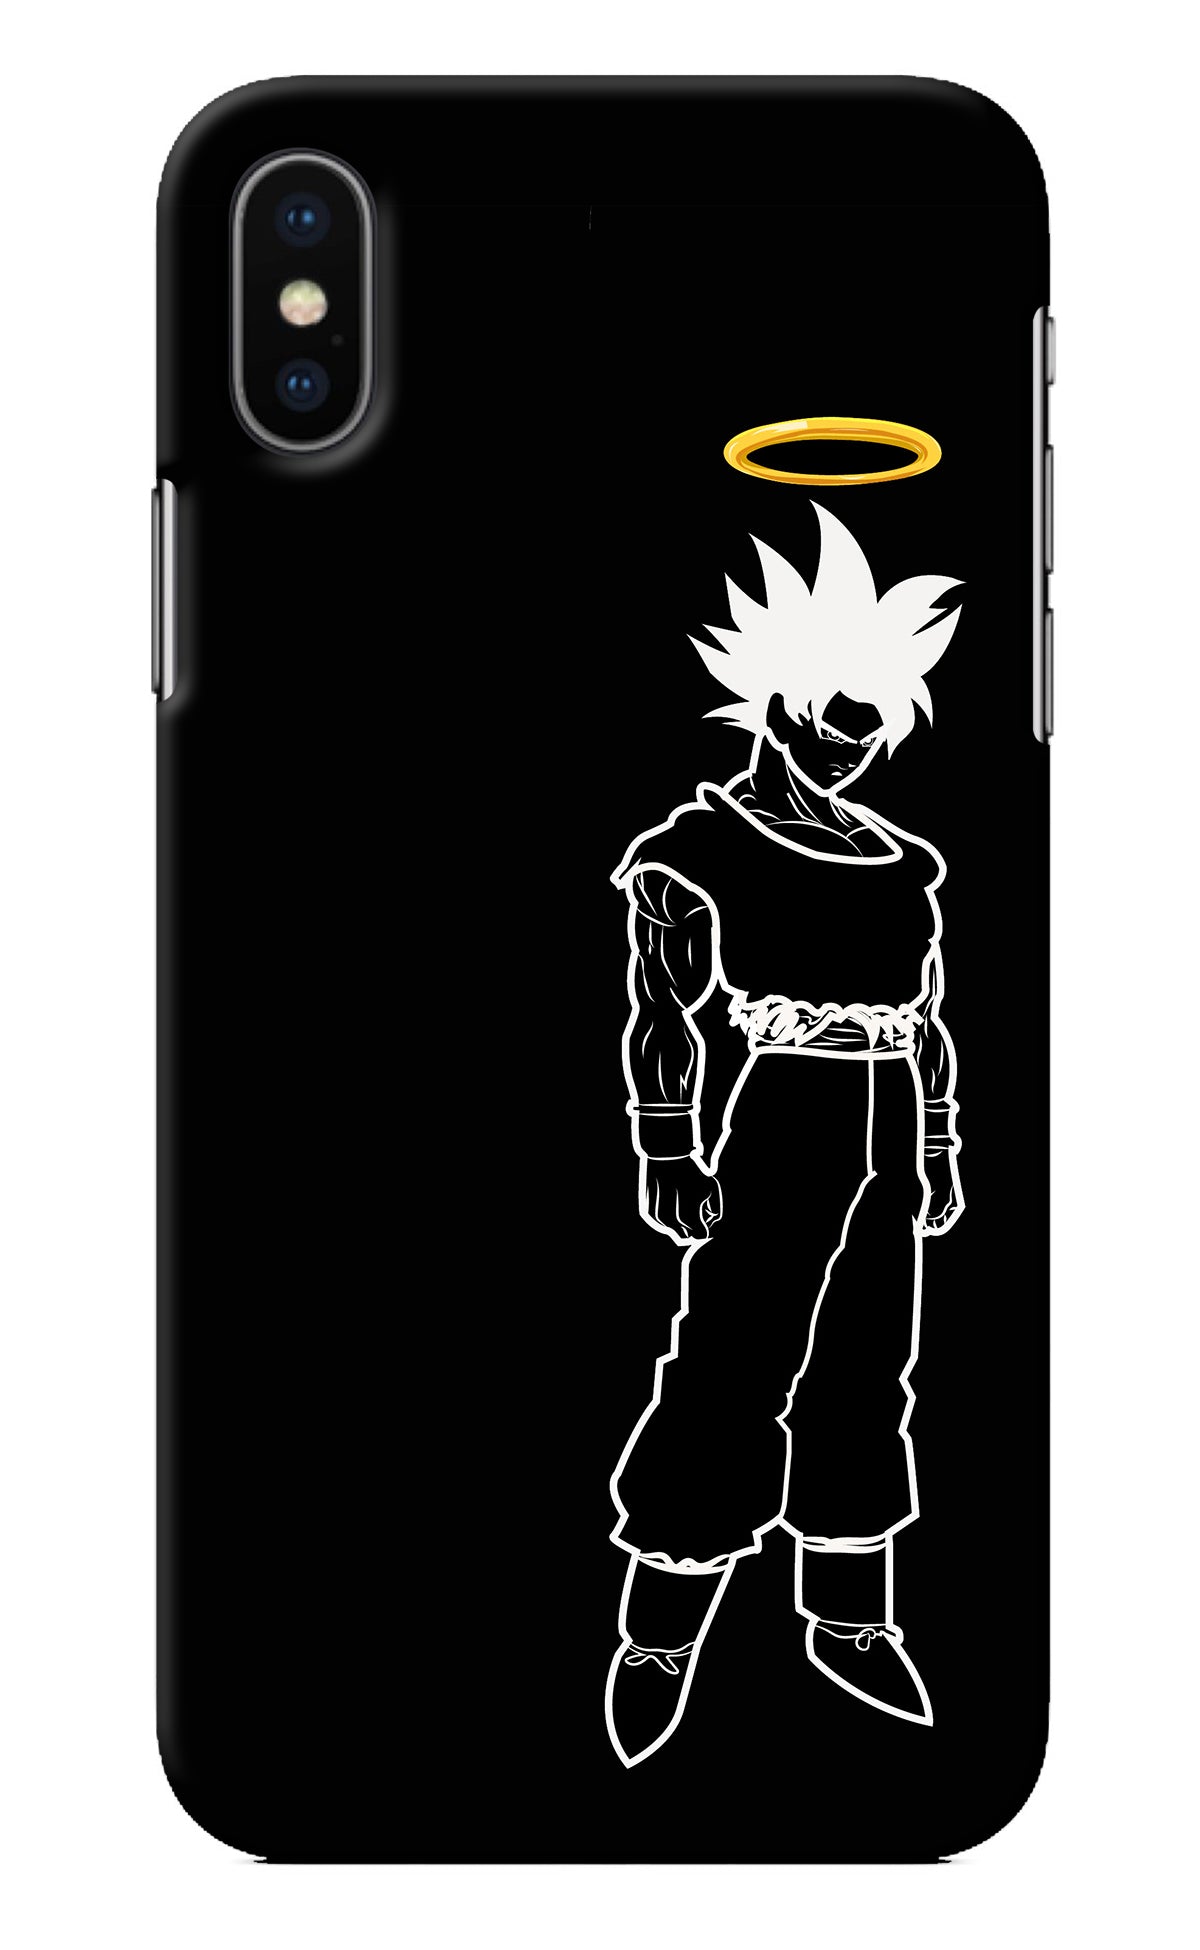 DBS Character iPhone X Back Cover